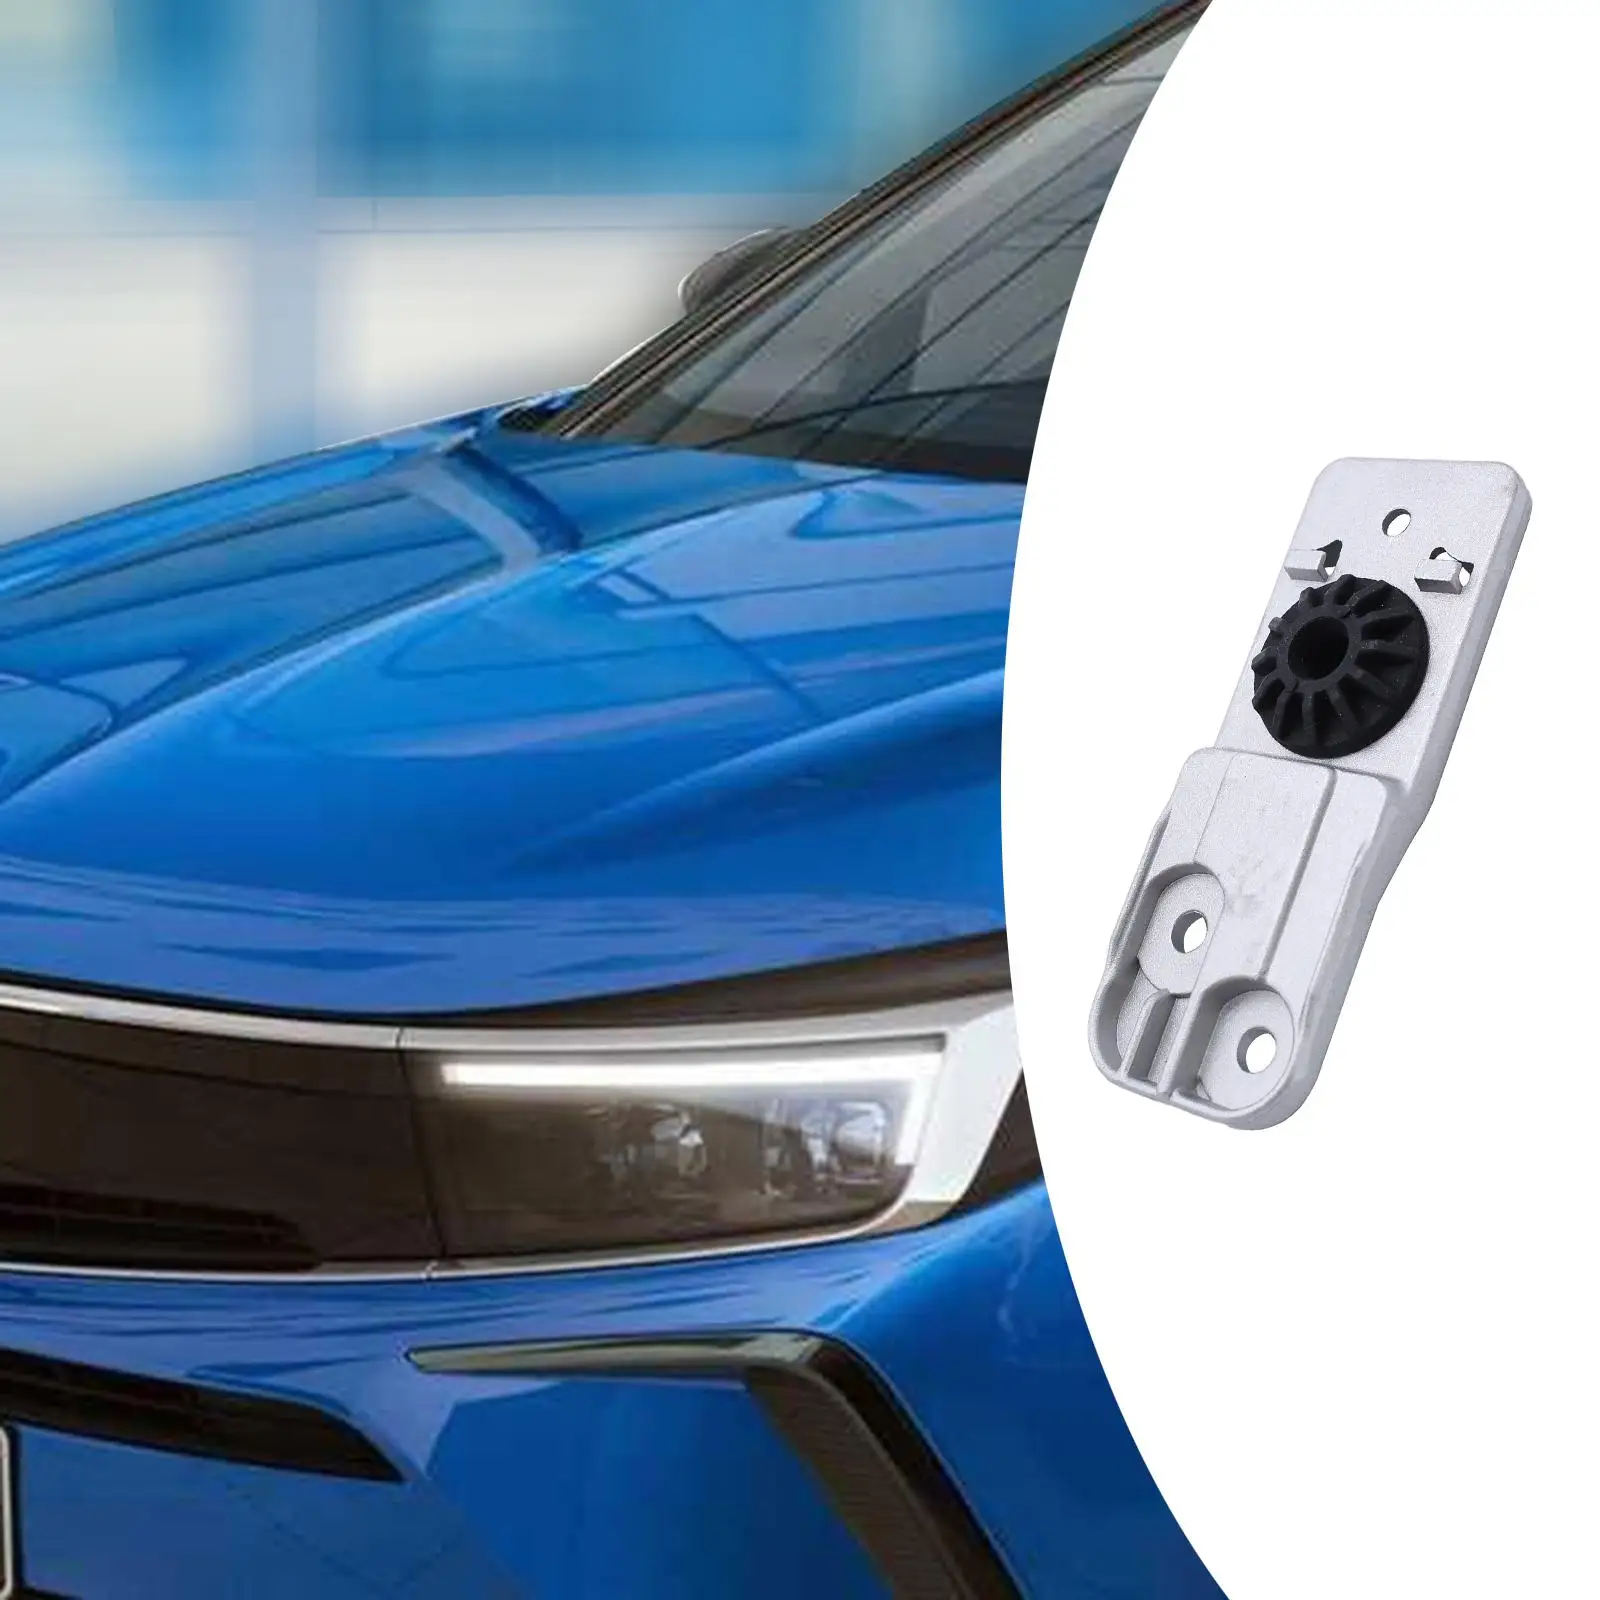 New Aluminum Alloy Lower Mounting Bracket Rack Fits  Mk6 2009 37826  and gentle, easy to install.